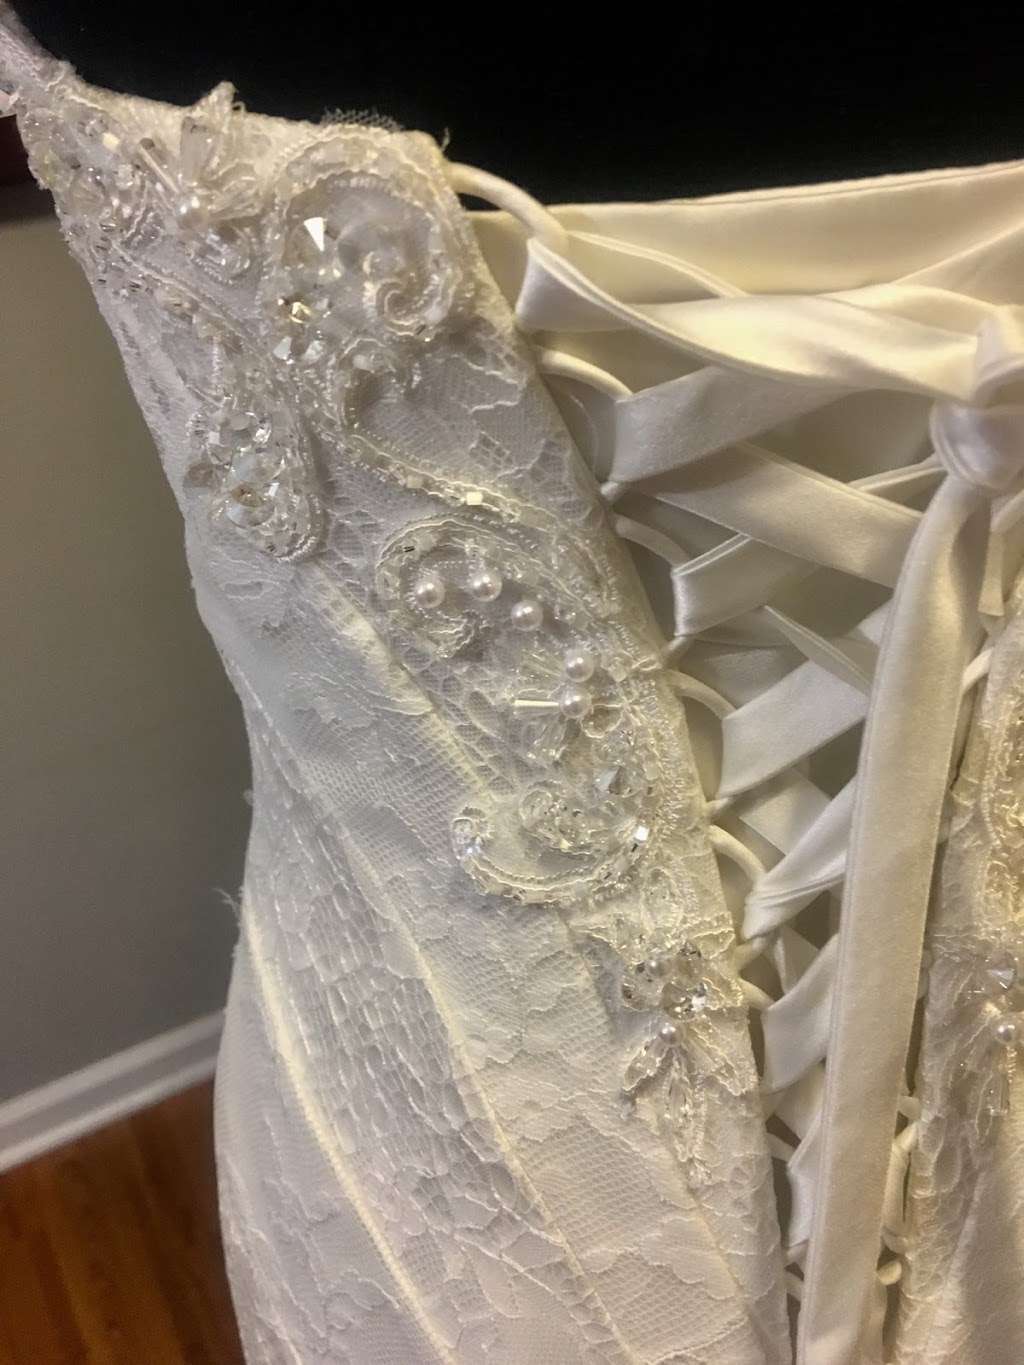 Two Sisters Bridal Gowns | 2542 Red Oak Dr, Dyer, IN 46311 | Phone: (219) 290-7044